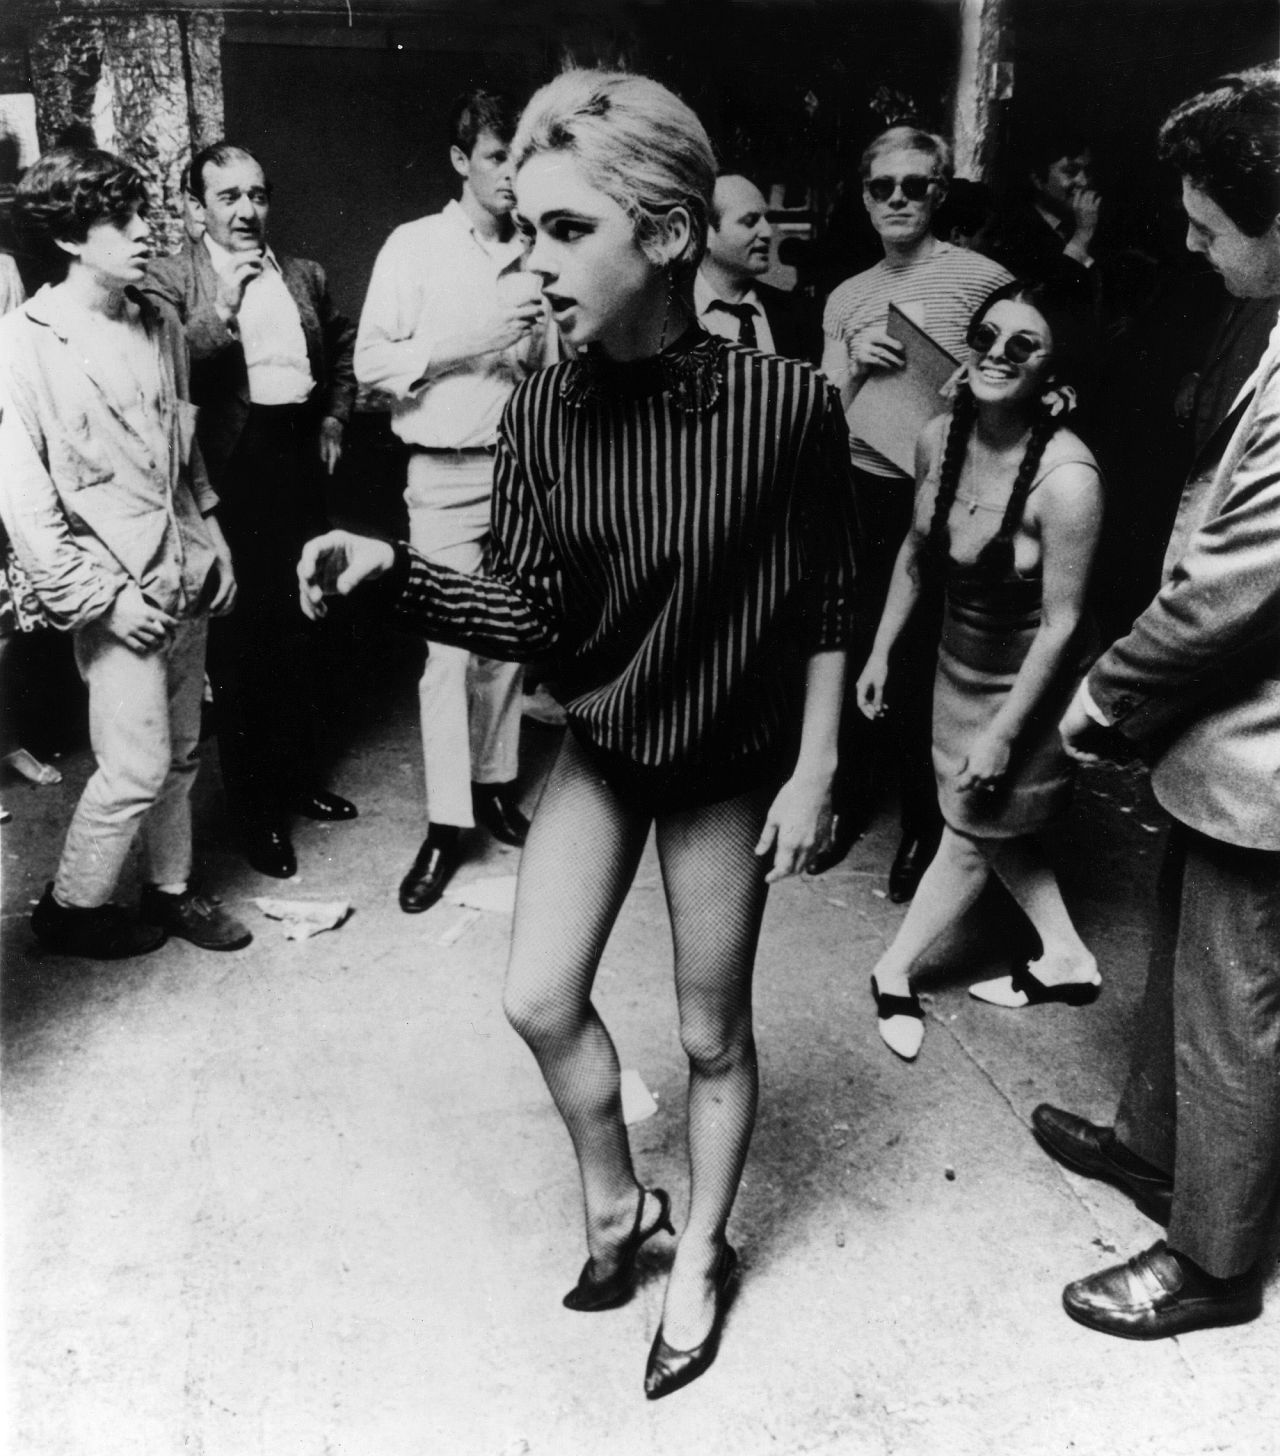 Edie Sedgwick stars in "Ciao! Manhattan" (1972) directed by John Palmer and David Weisman.